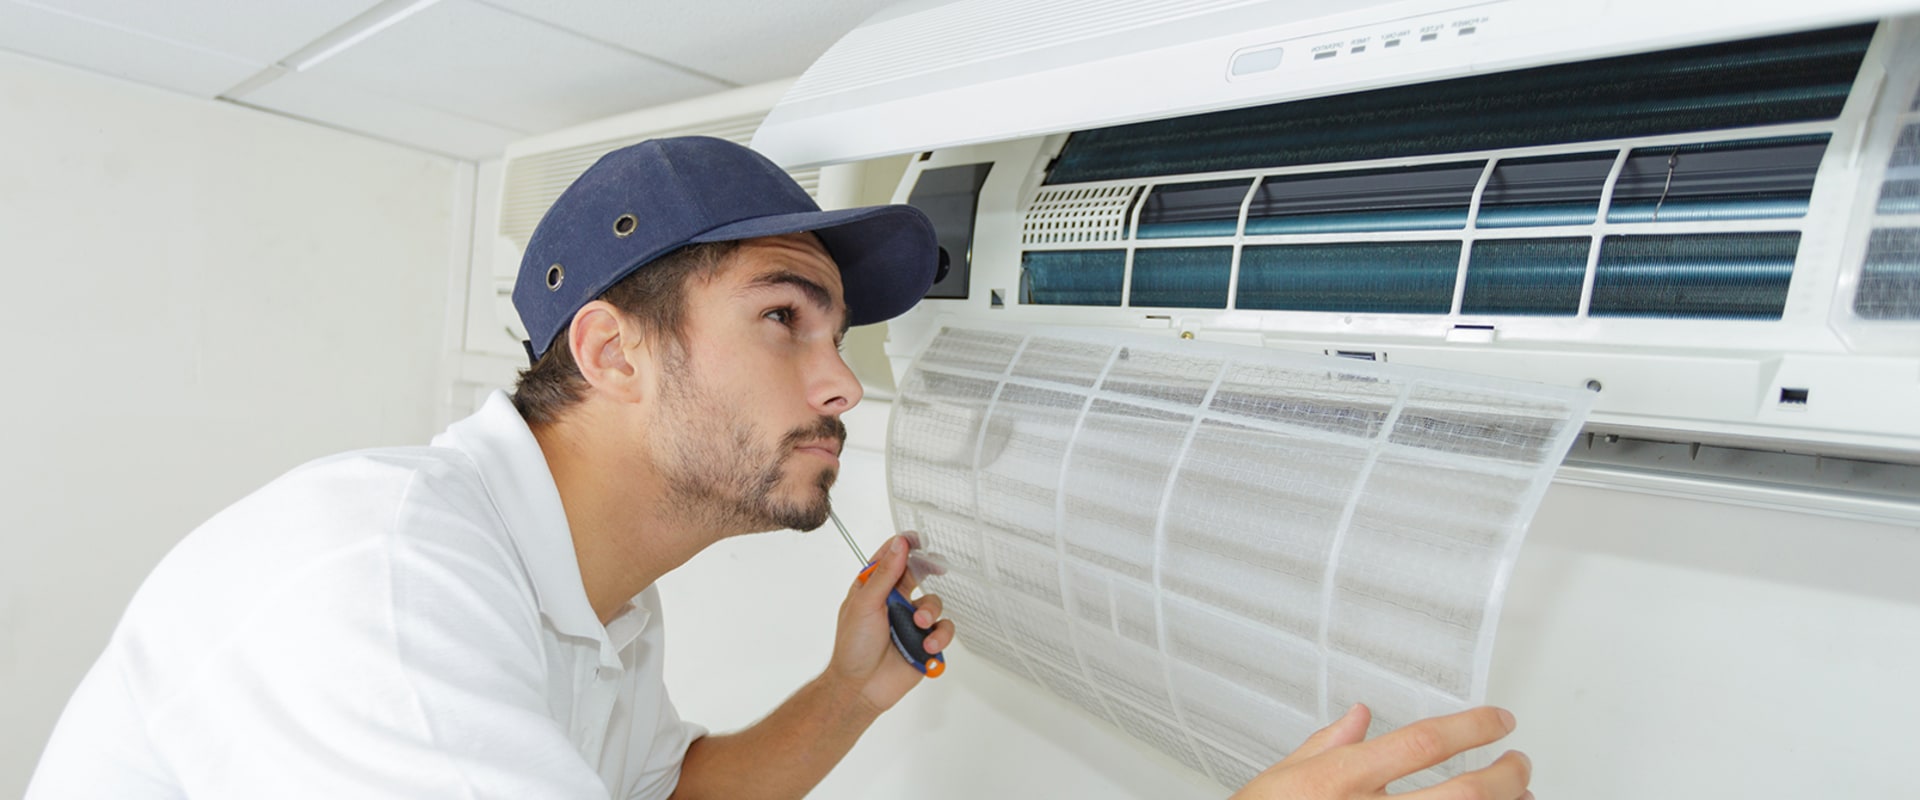 What Type of Training and Certifications Should I Look for When Hiring an HVAC Contractor in Delray Beach, FL?